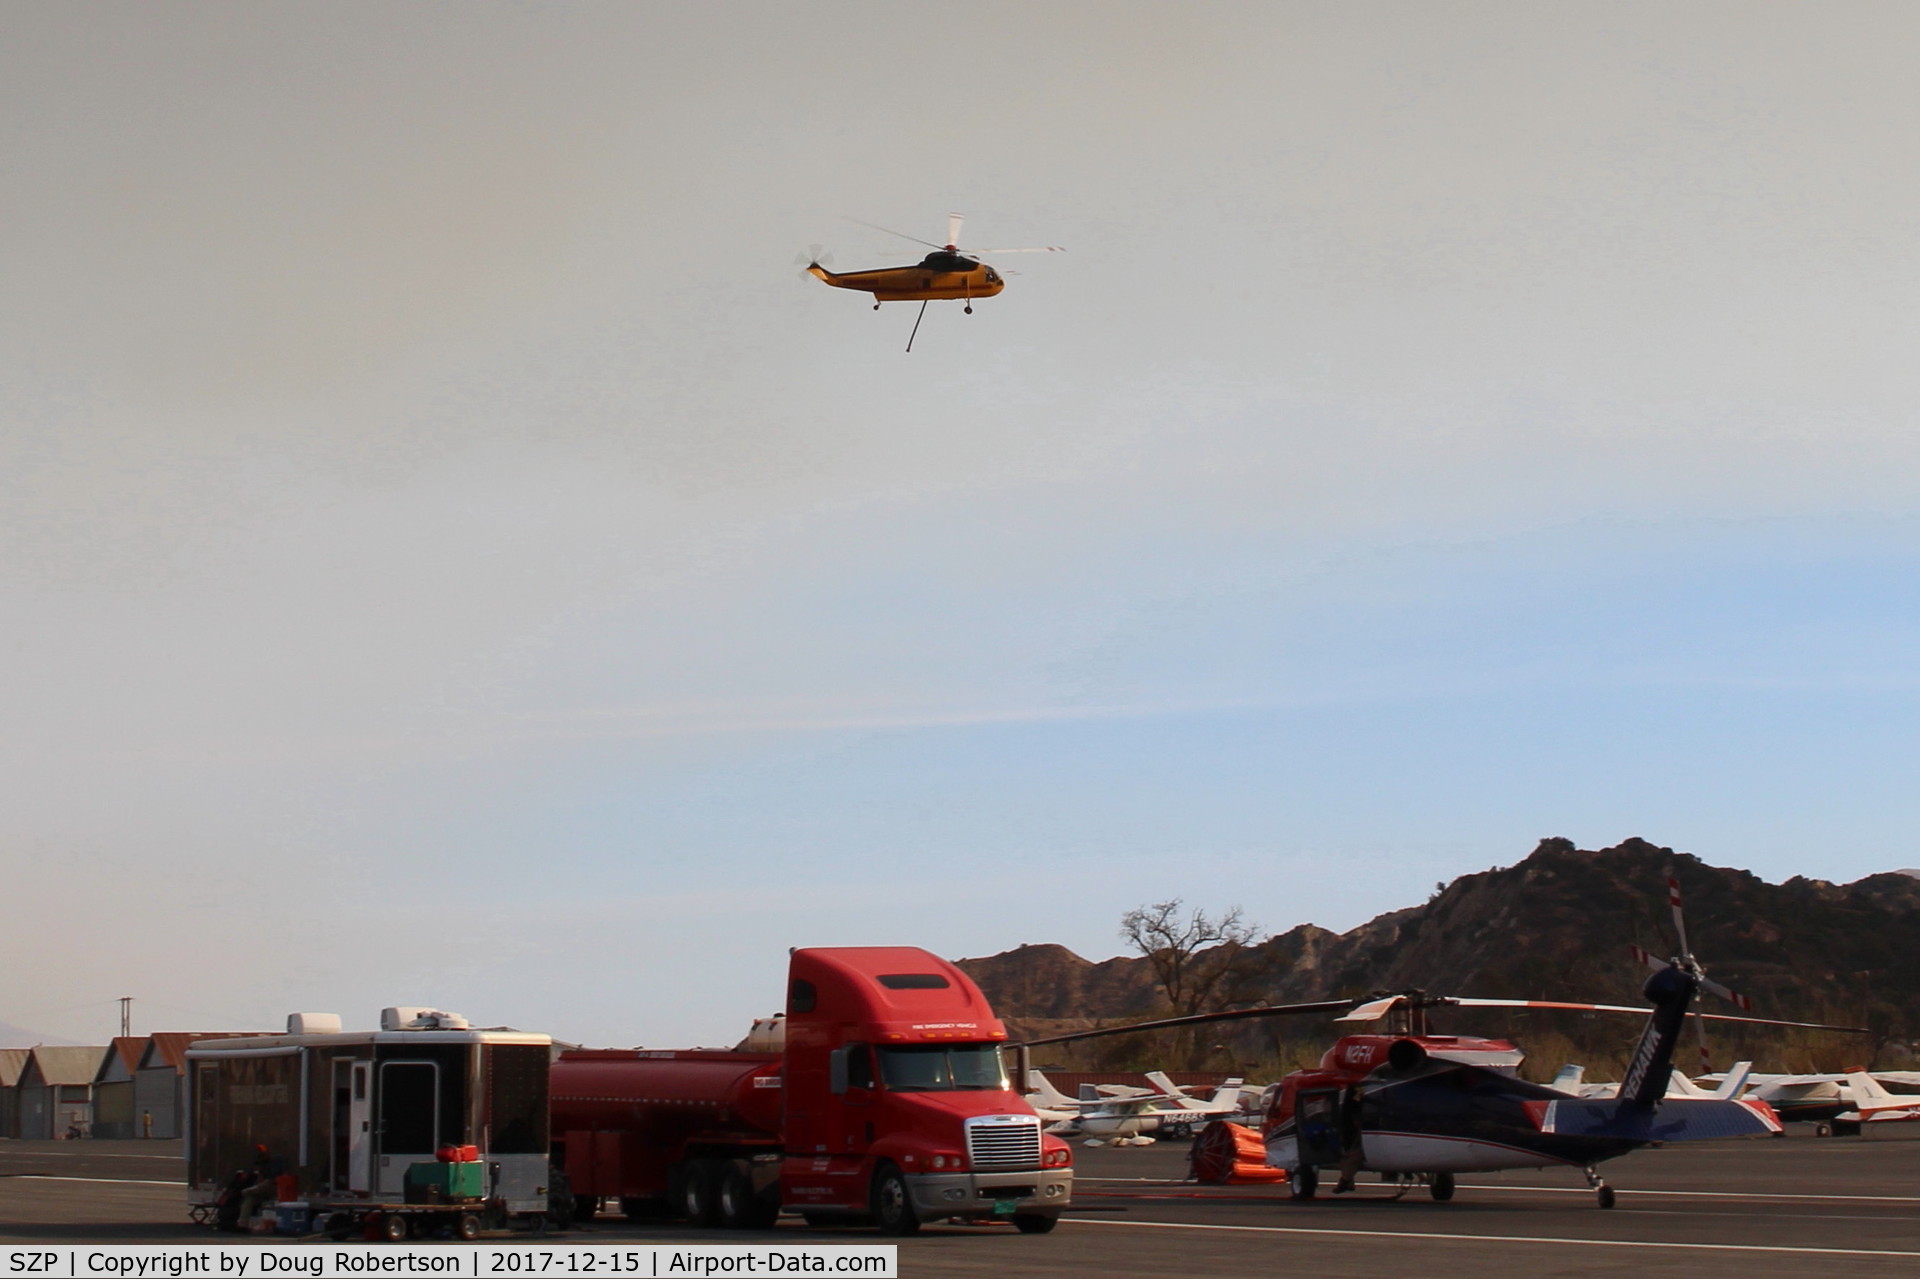 Santa Paula Airport (SZP) - CROMAN helicopter with Phos-Chek sling load dumped, returning to SZP Firebase. Note smoky sky.